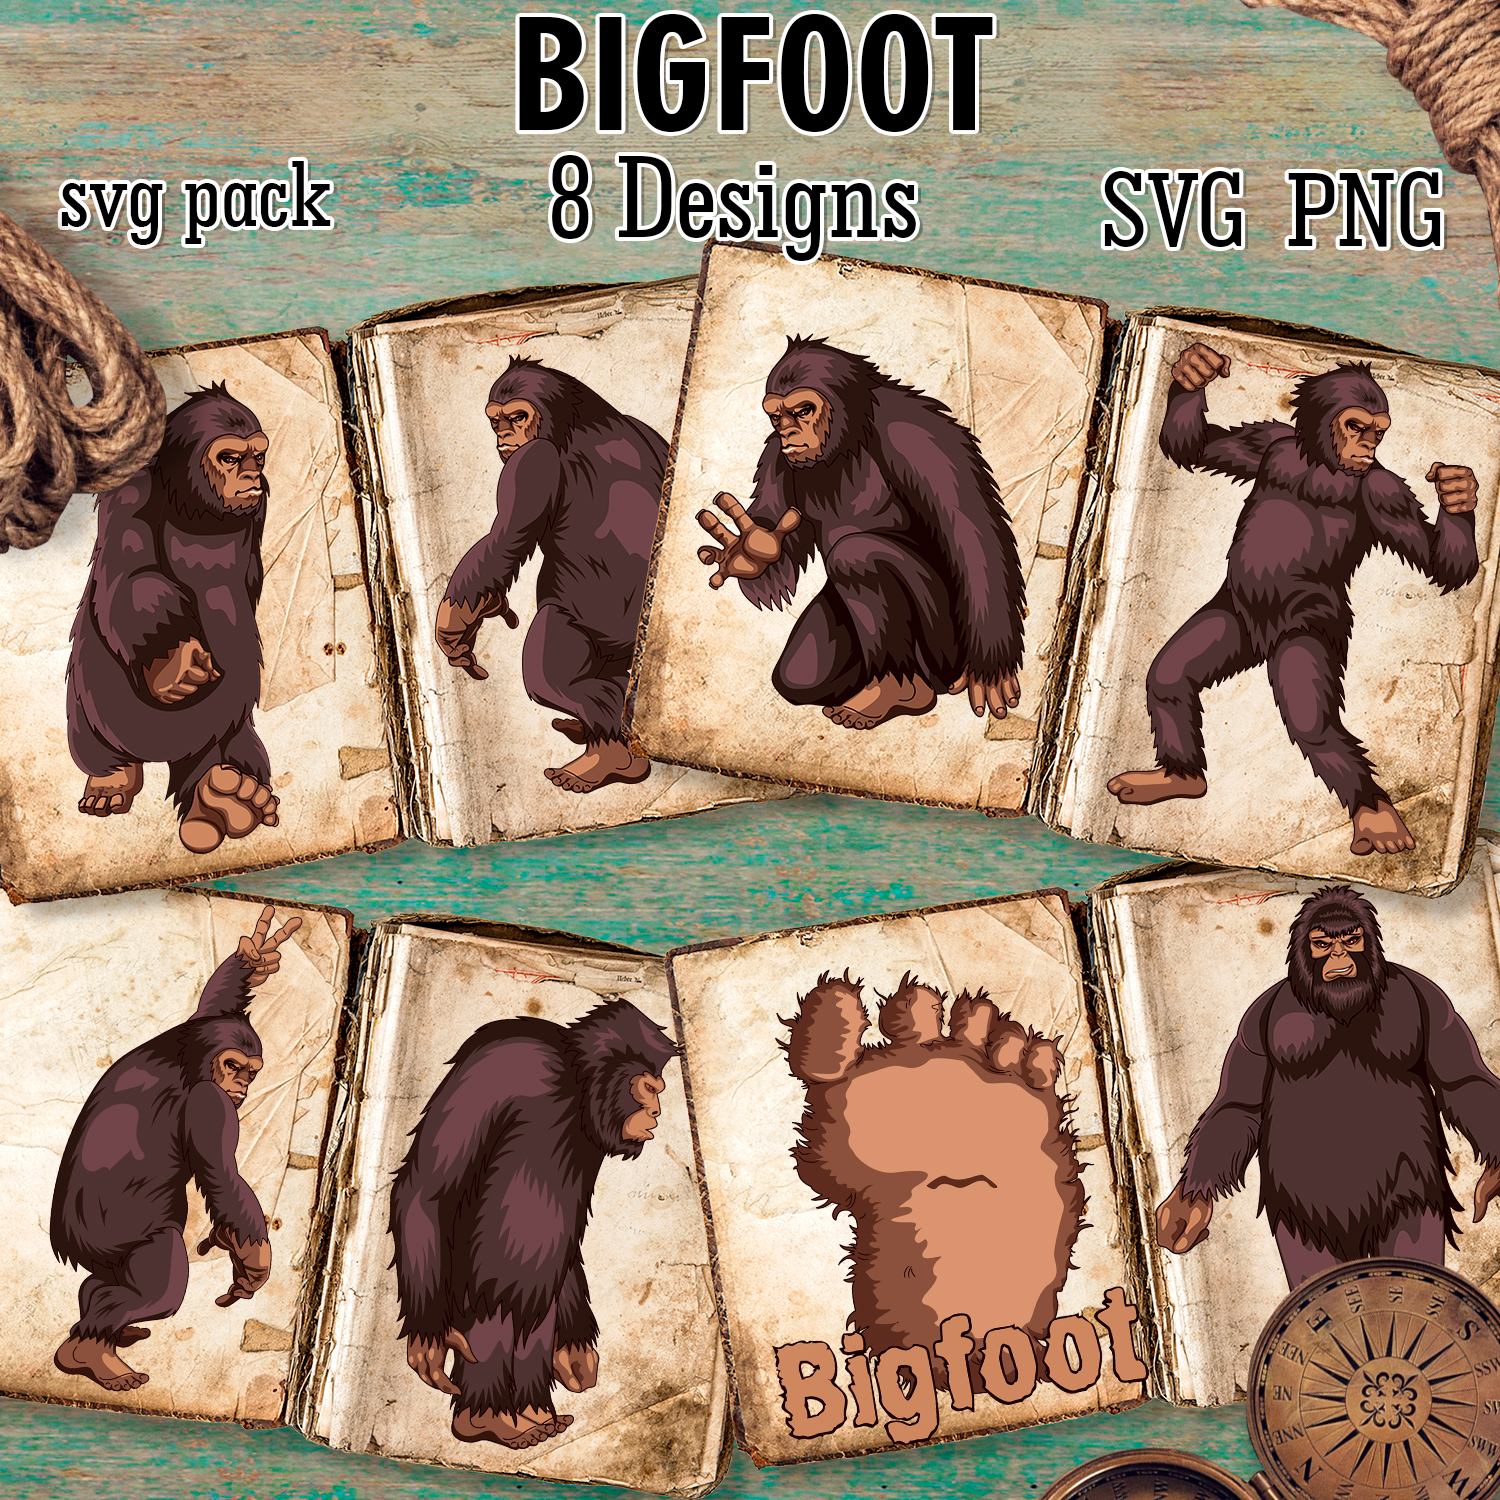 Bunch of cards with a bigfoot on them.